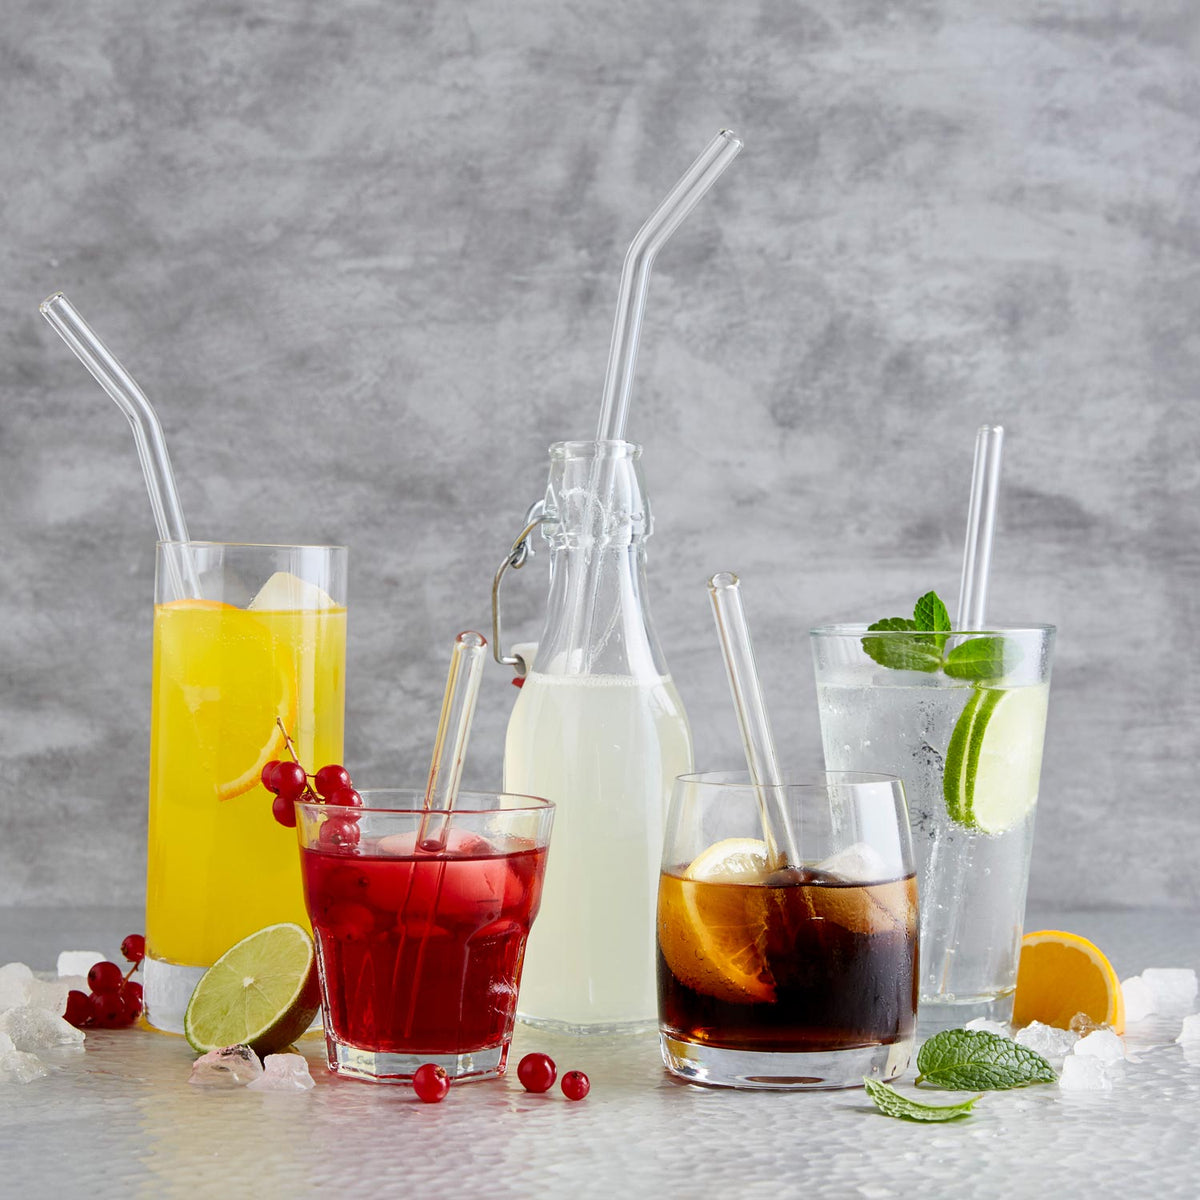 Halm Glass Straws - 6 Long 12 inch Bent Reusable Drinking Straws +  Plastic-Free Cleaning Brush - Perfect for Bottles - 30 cm Made in Germany 